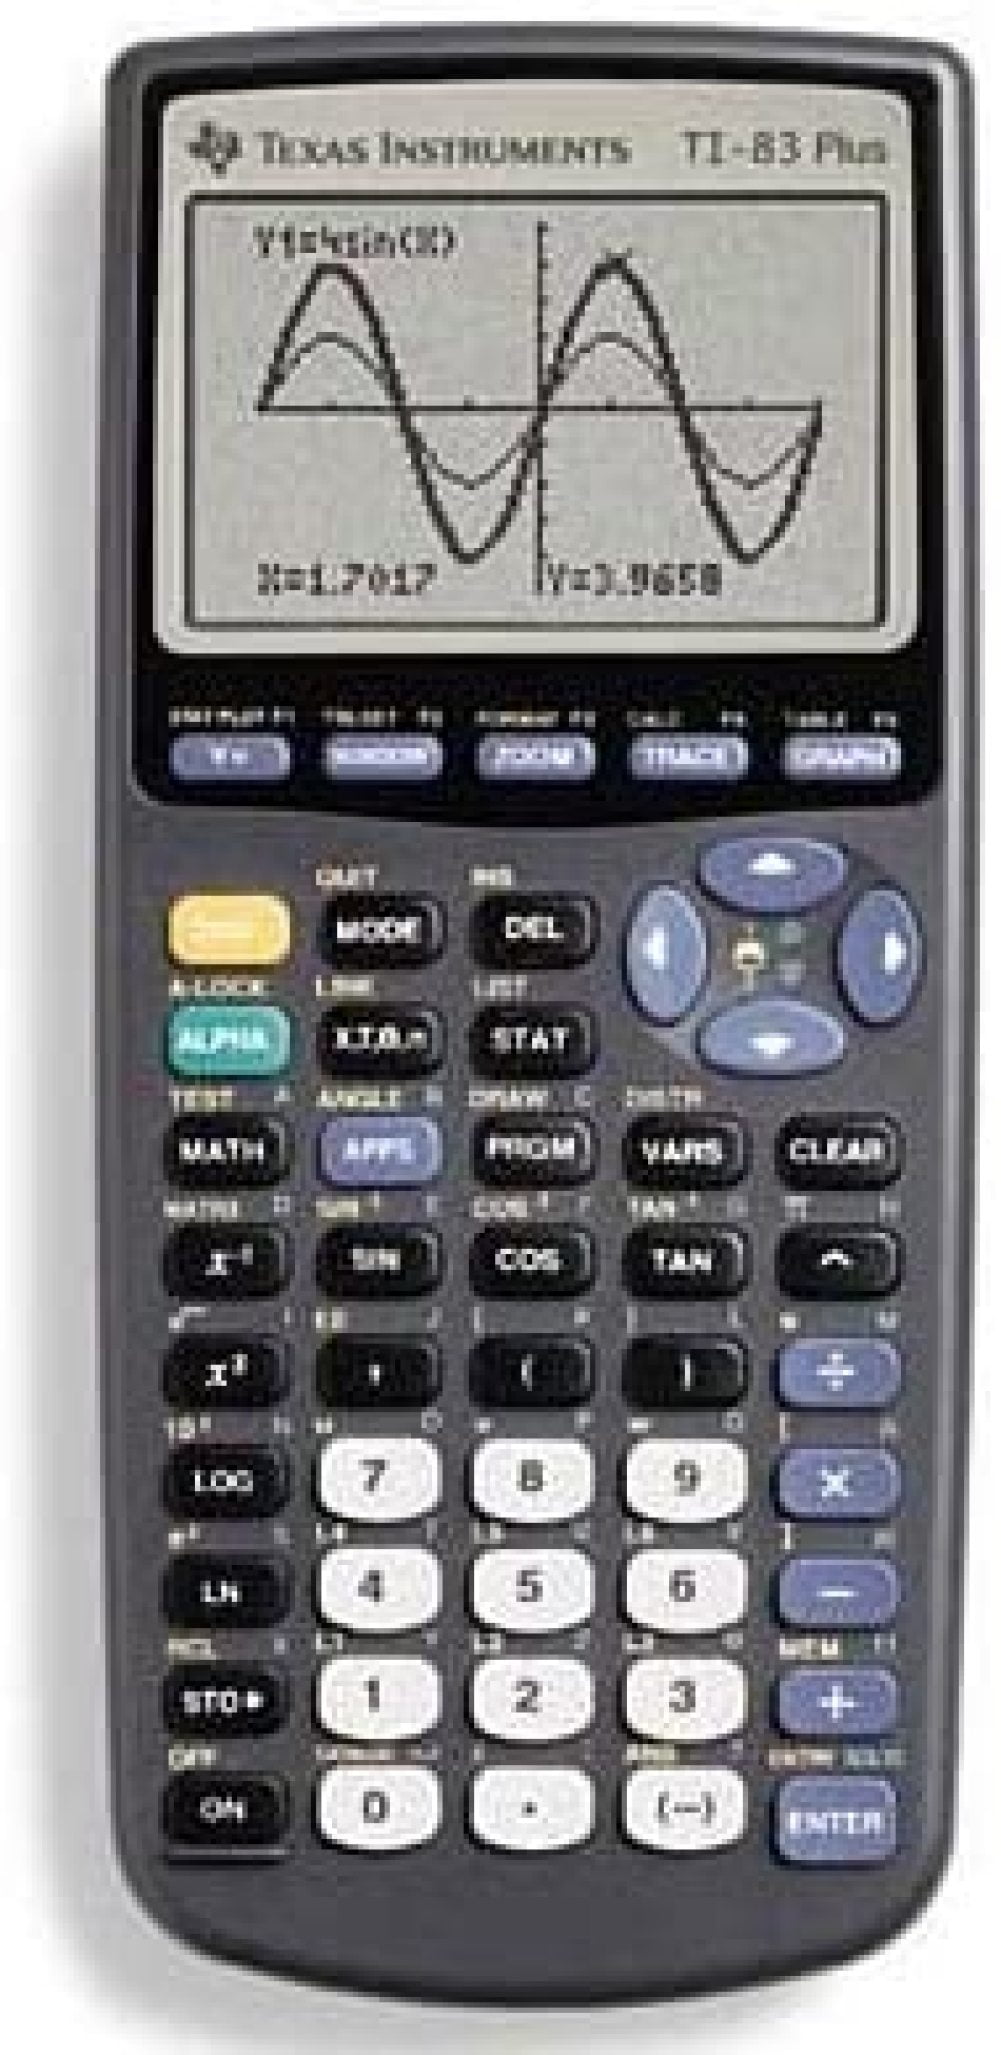 Texas Instruments TI-83 Plus Graphing Calculator Tested Great Condition 